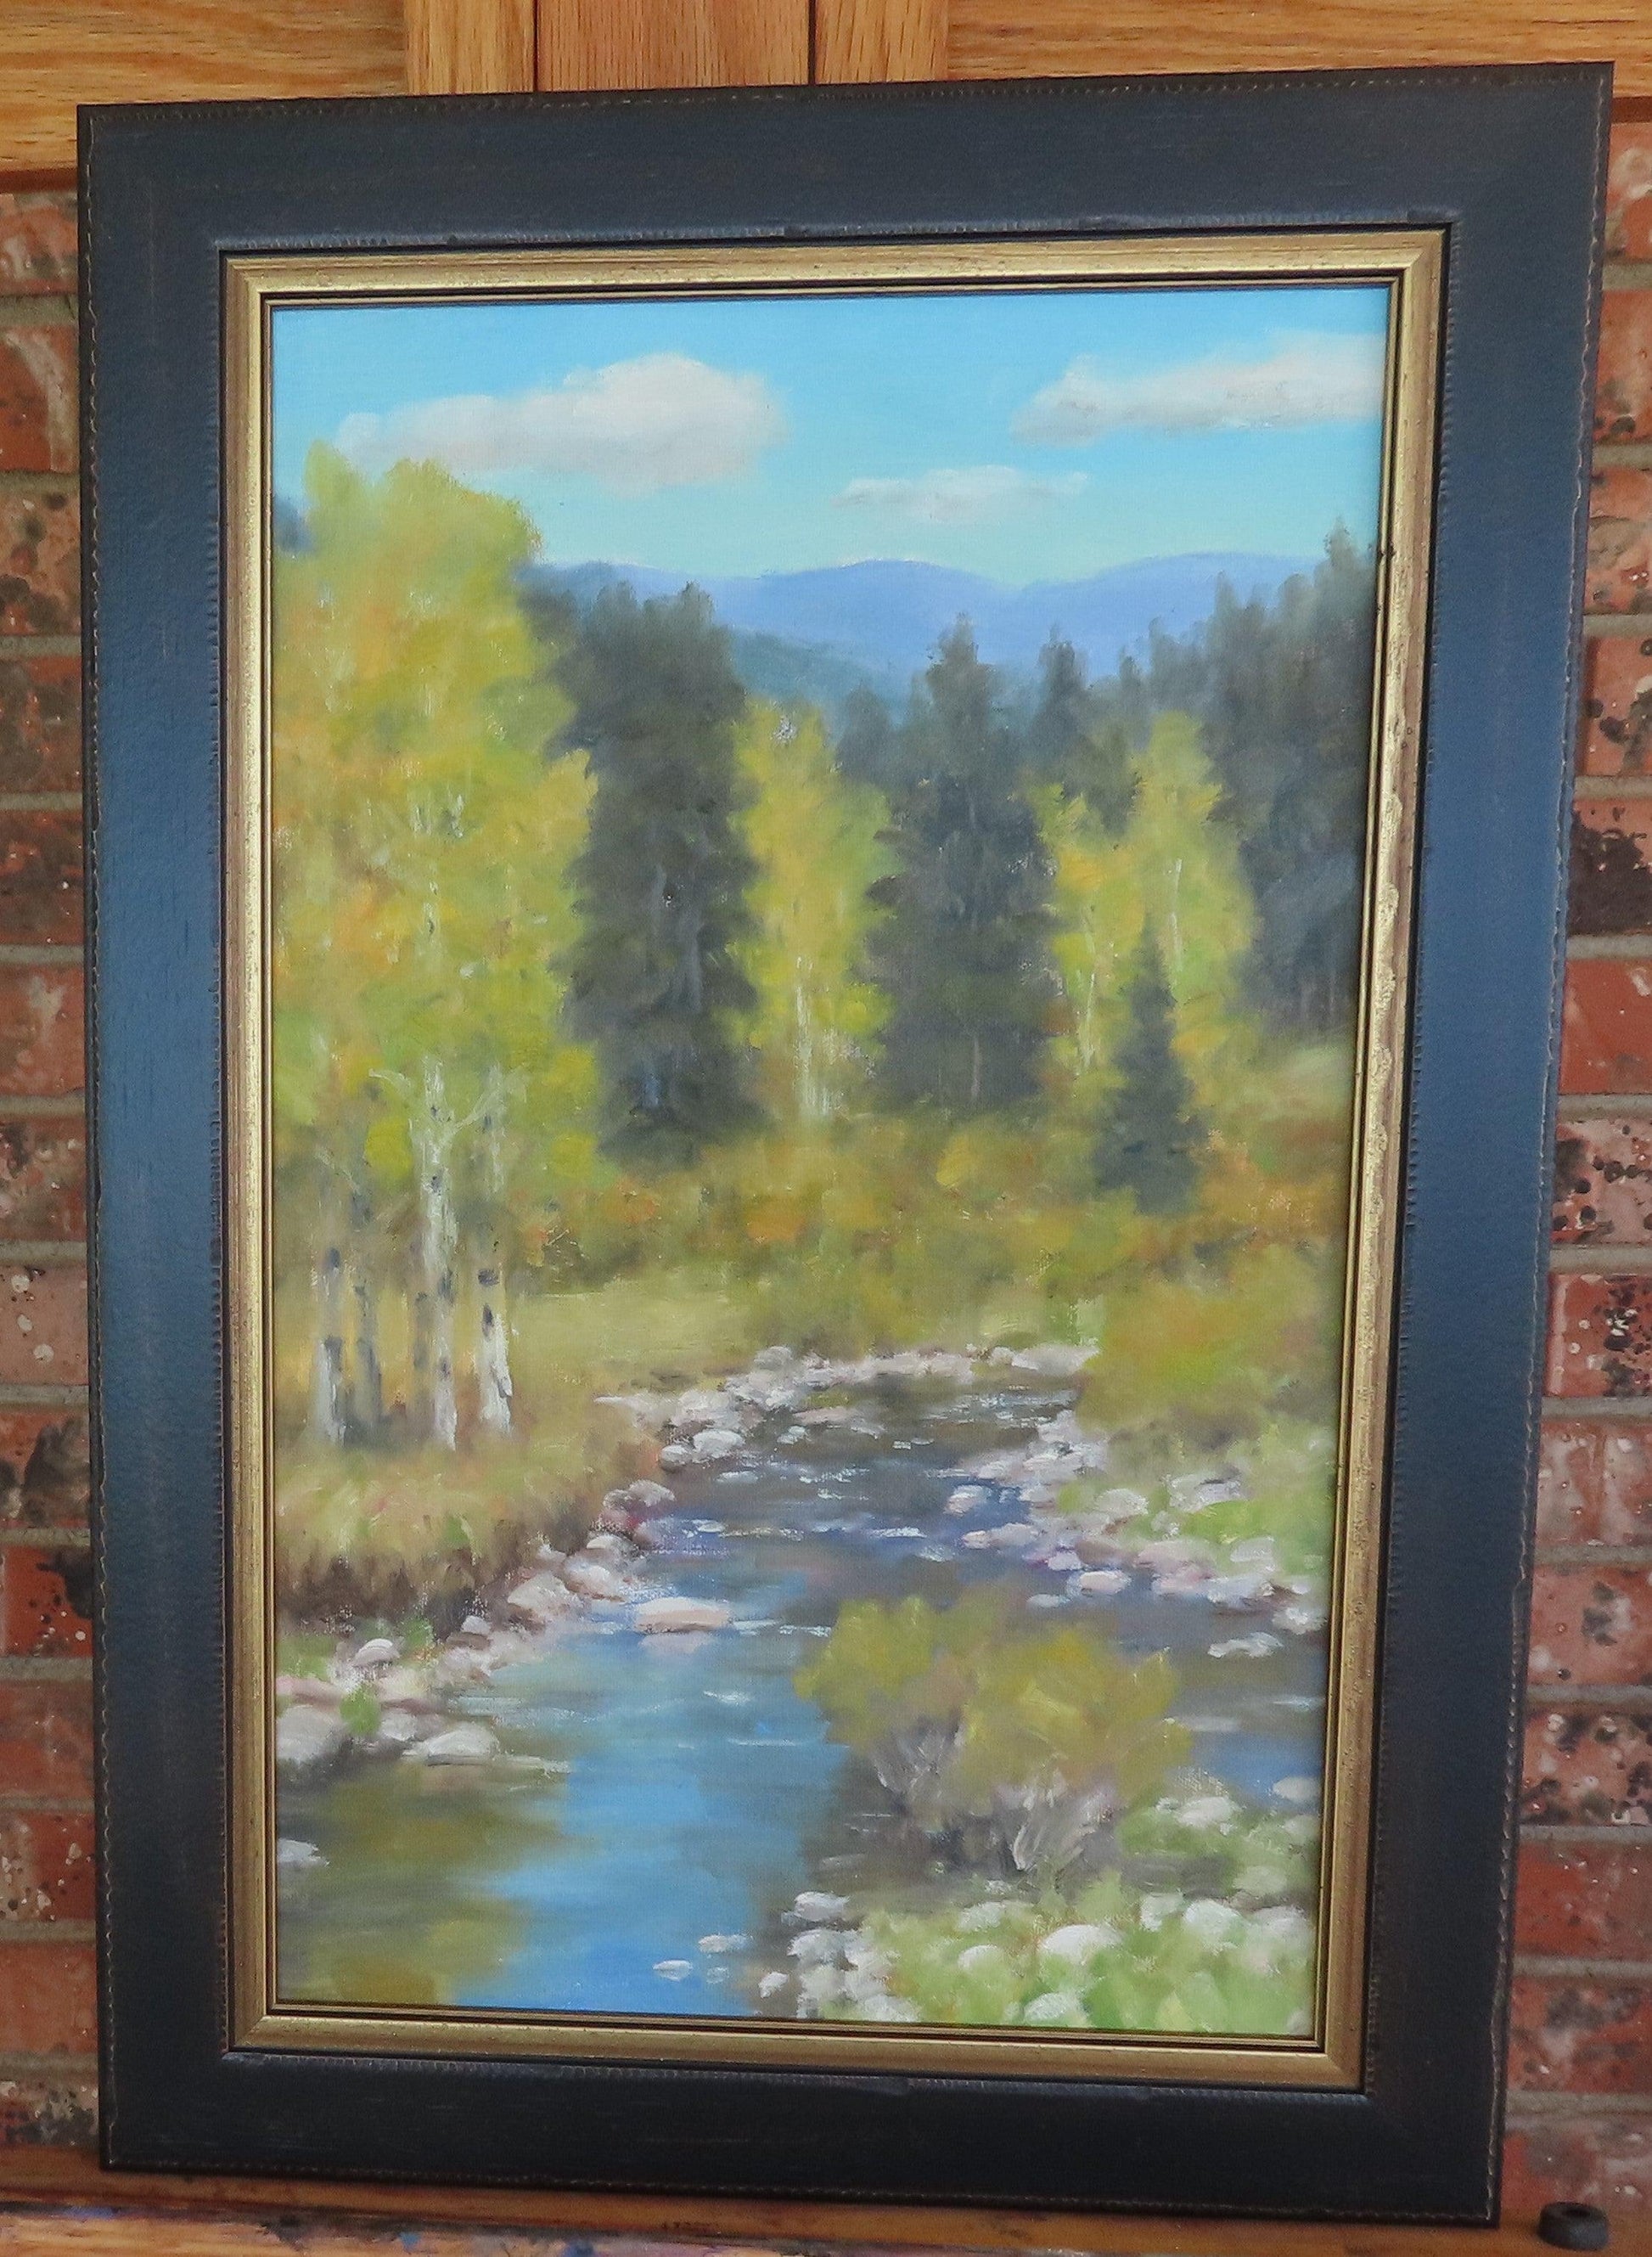 High Valley Fall-painting-Stephen Day-Sorrel Sky Gallery